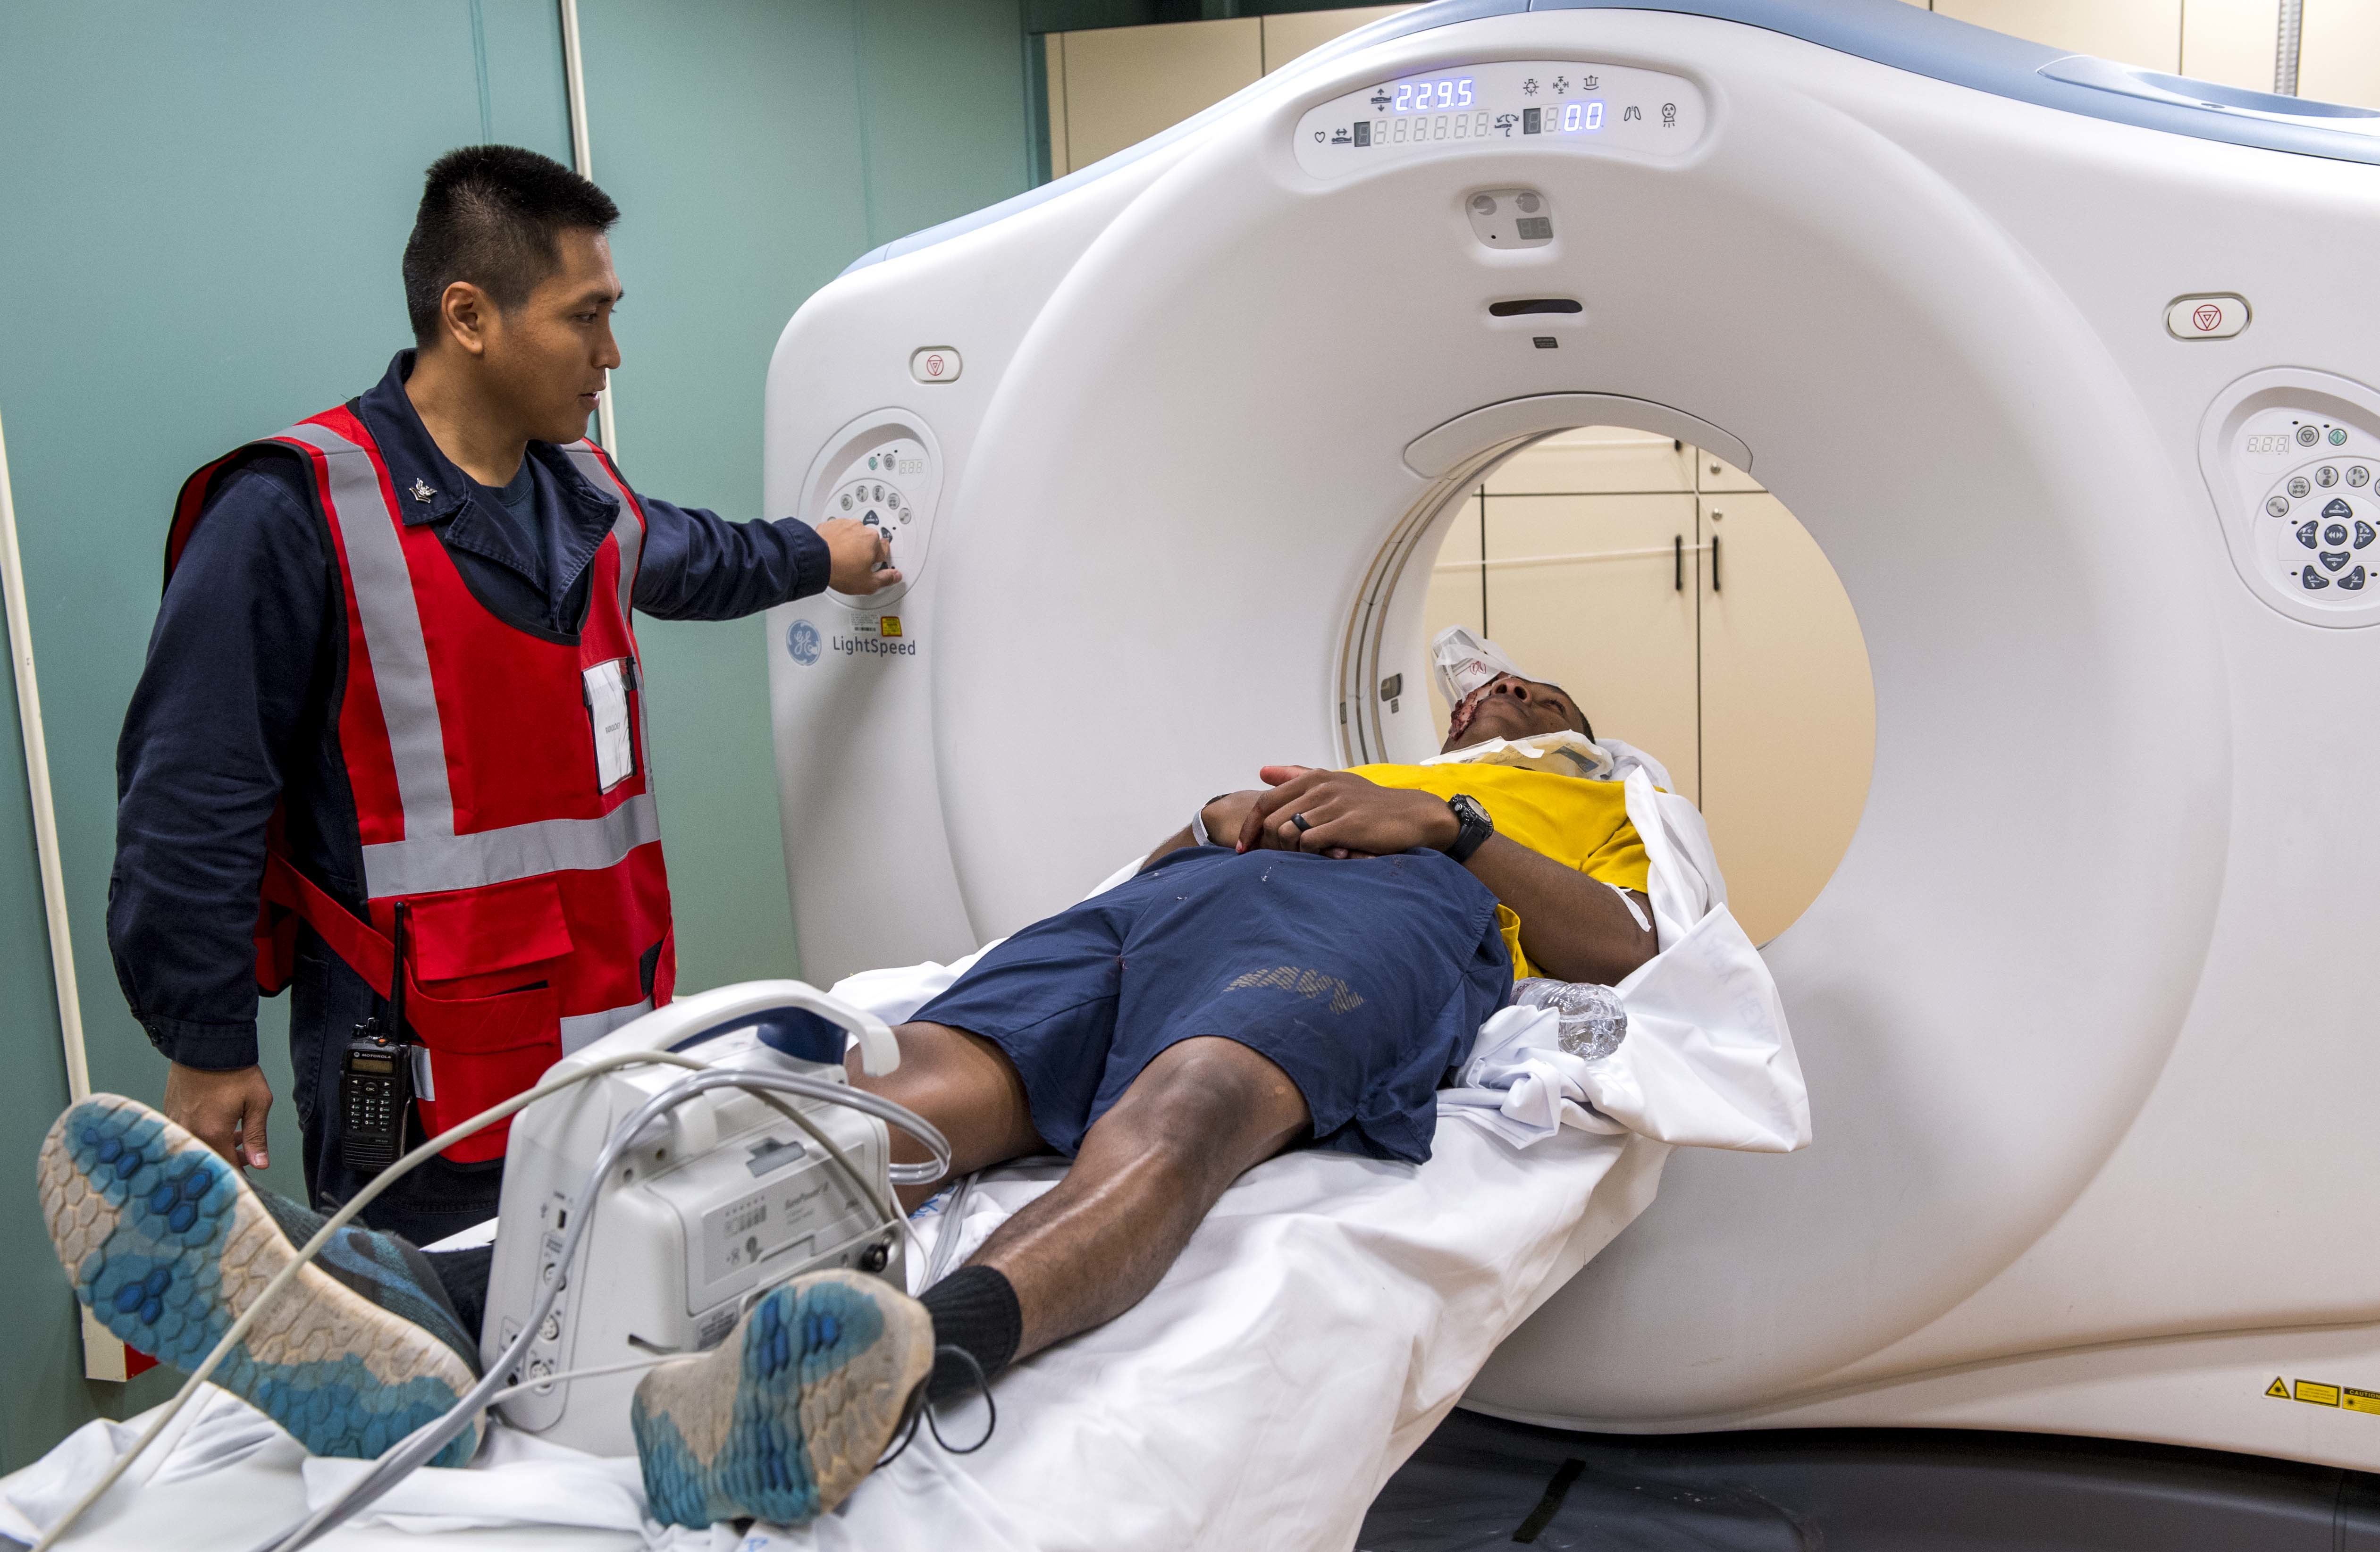 USNS Mercy Simulates Scans During U.S. Navy Mass Drill | Imaging Technology News